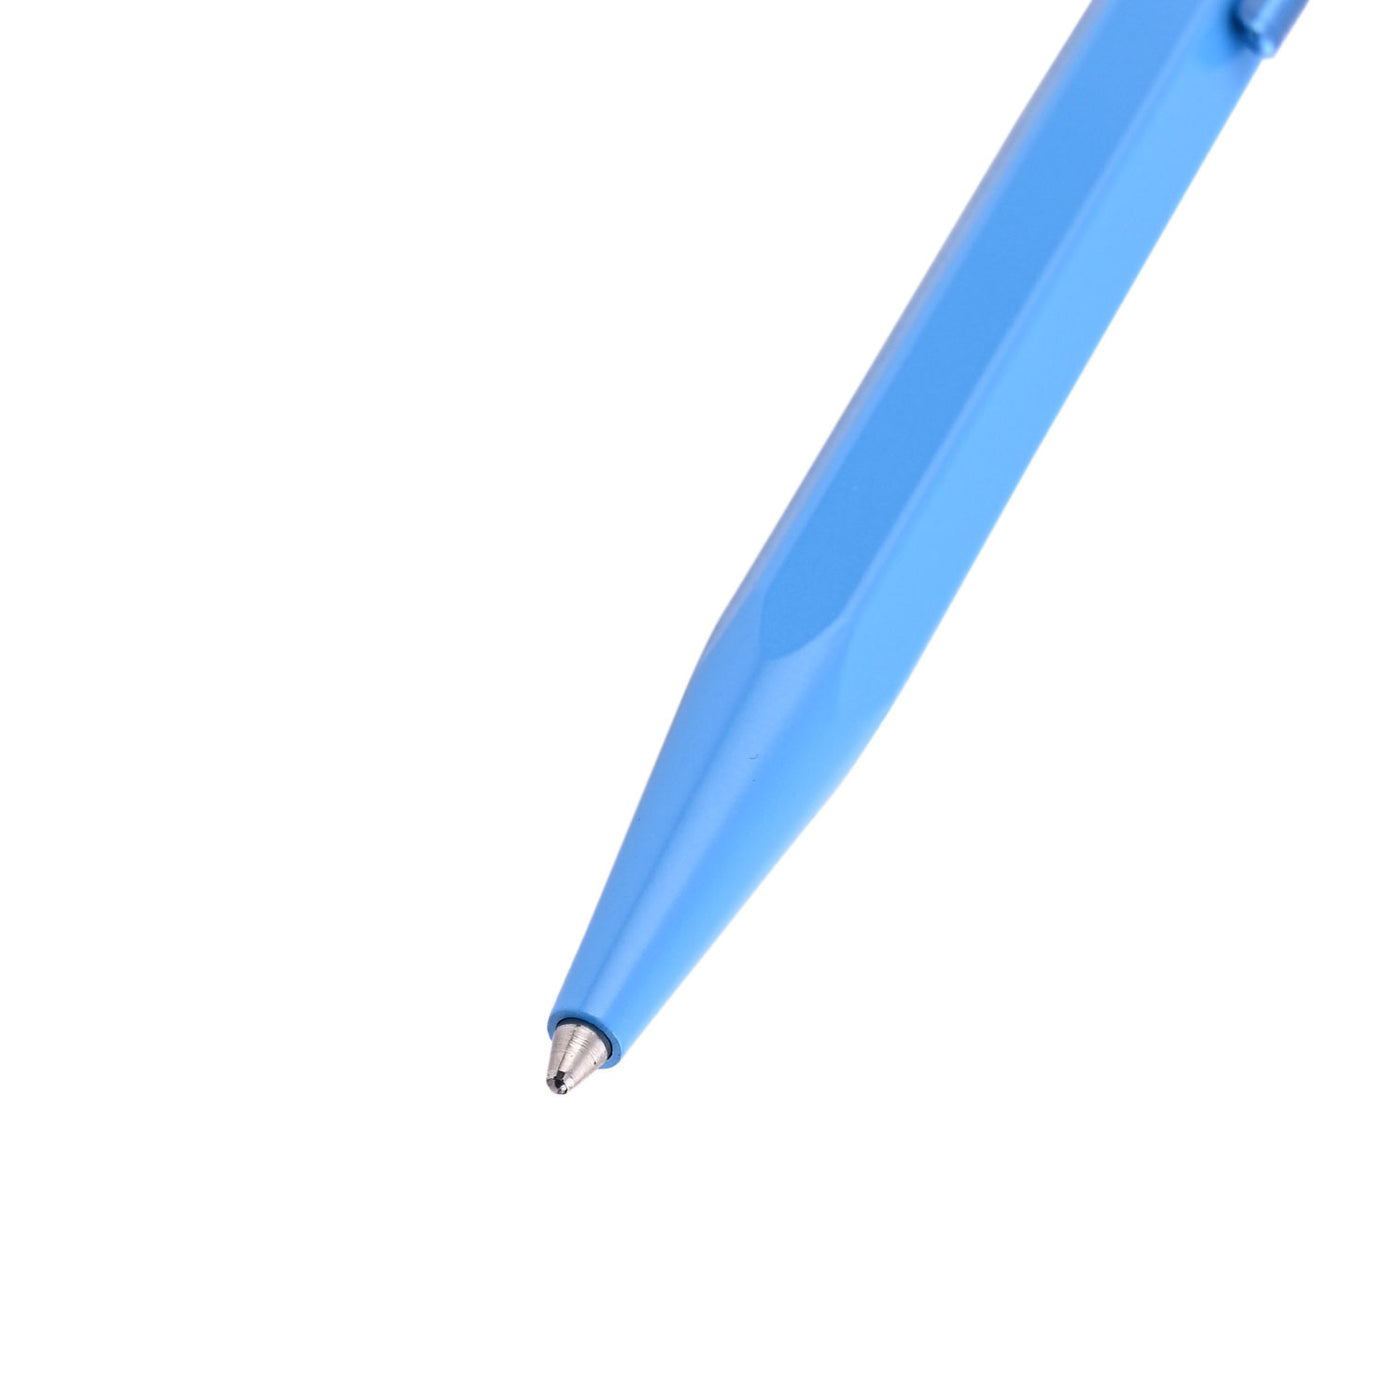 Caran d'Ache 849 Claim Your Style Ball Pen - Azure Blue (Limited Edition) 2